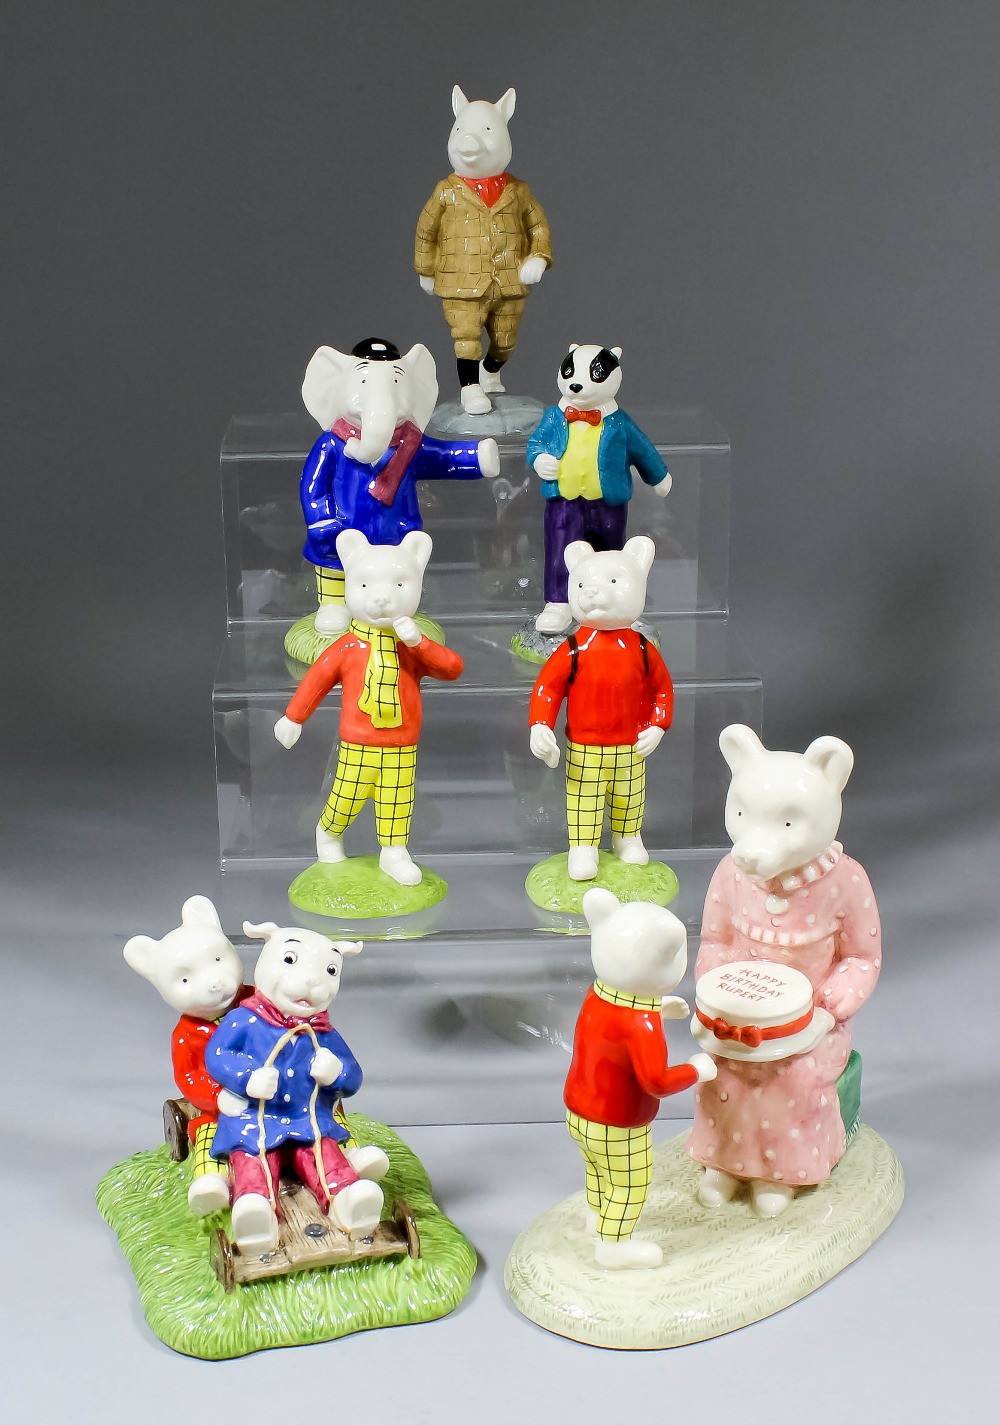 Seven modern limited edition Beswick bone china figures of Rupert and his friends, comprising - "